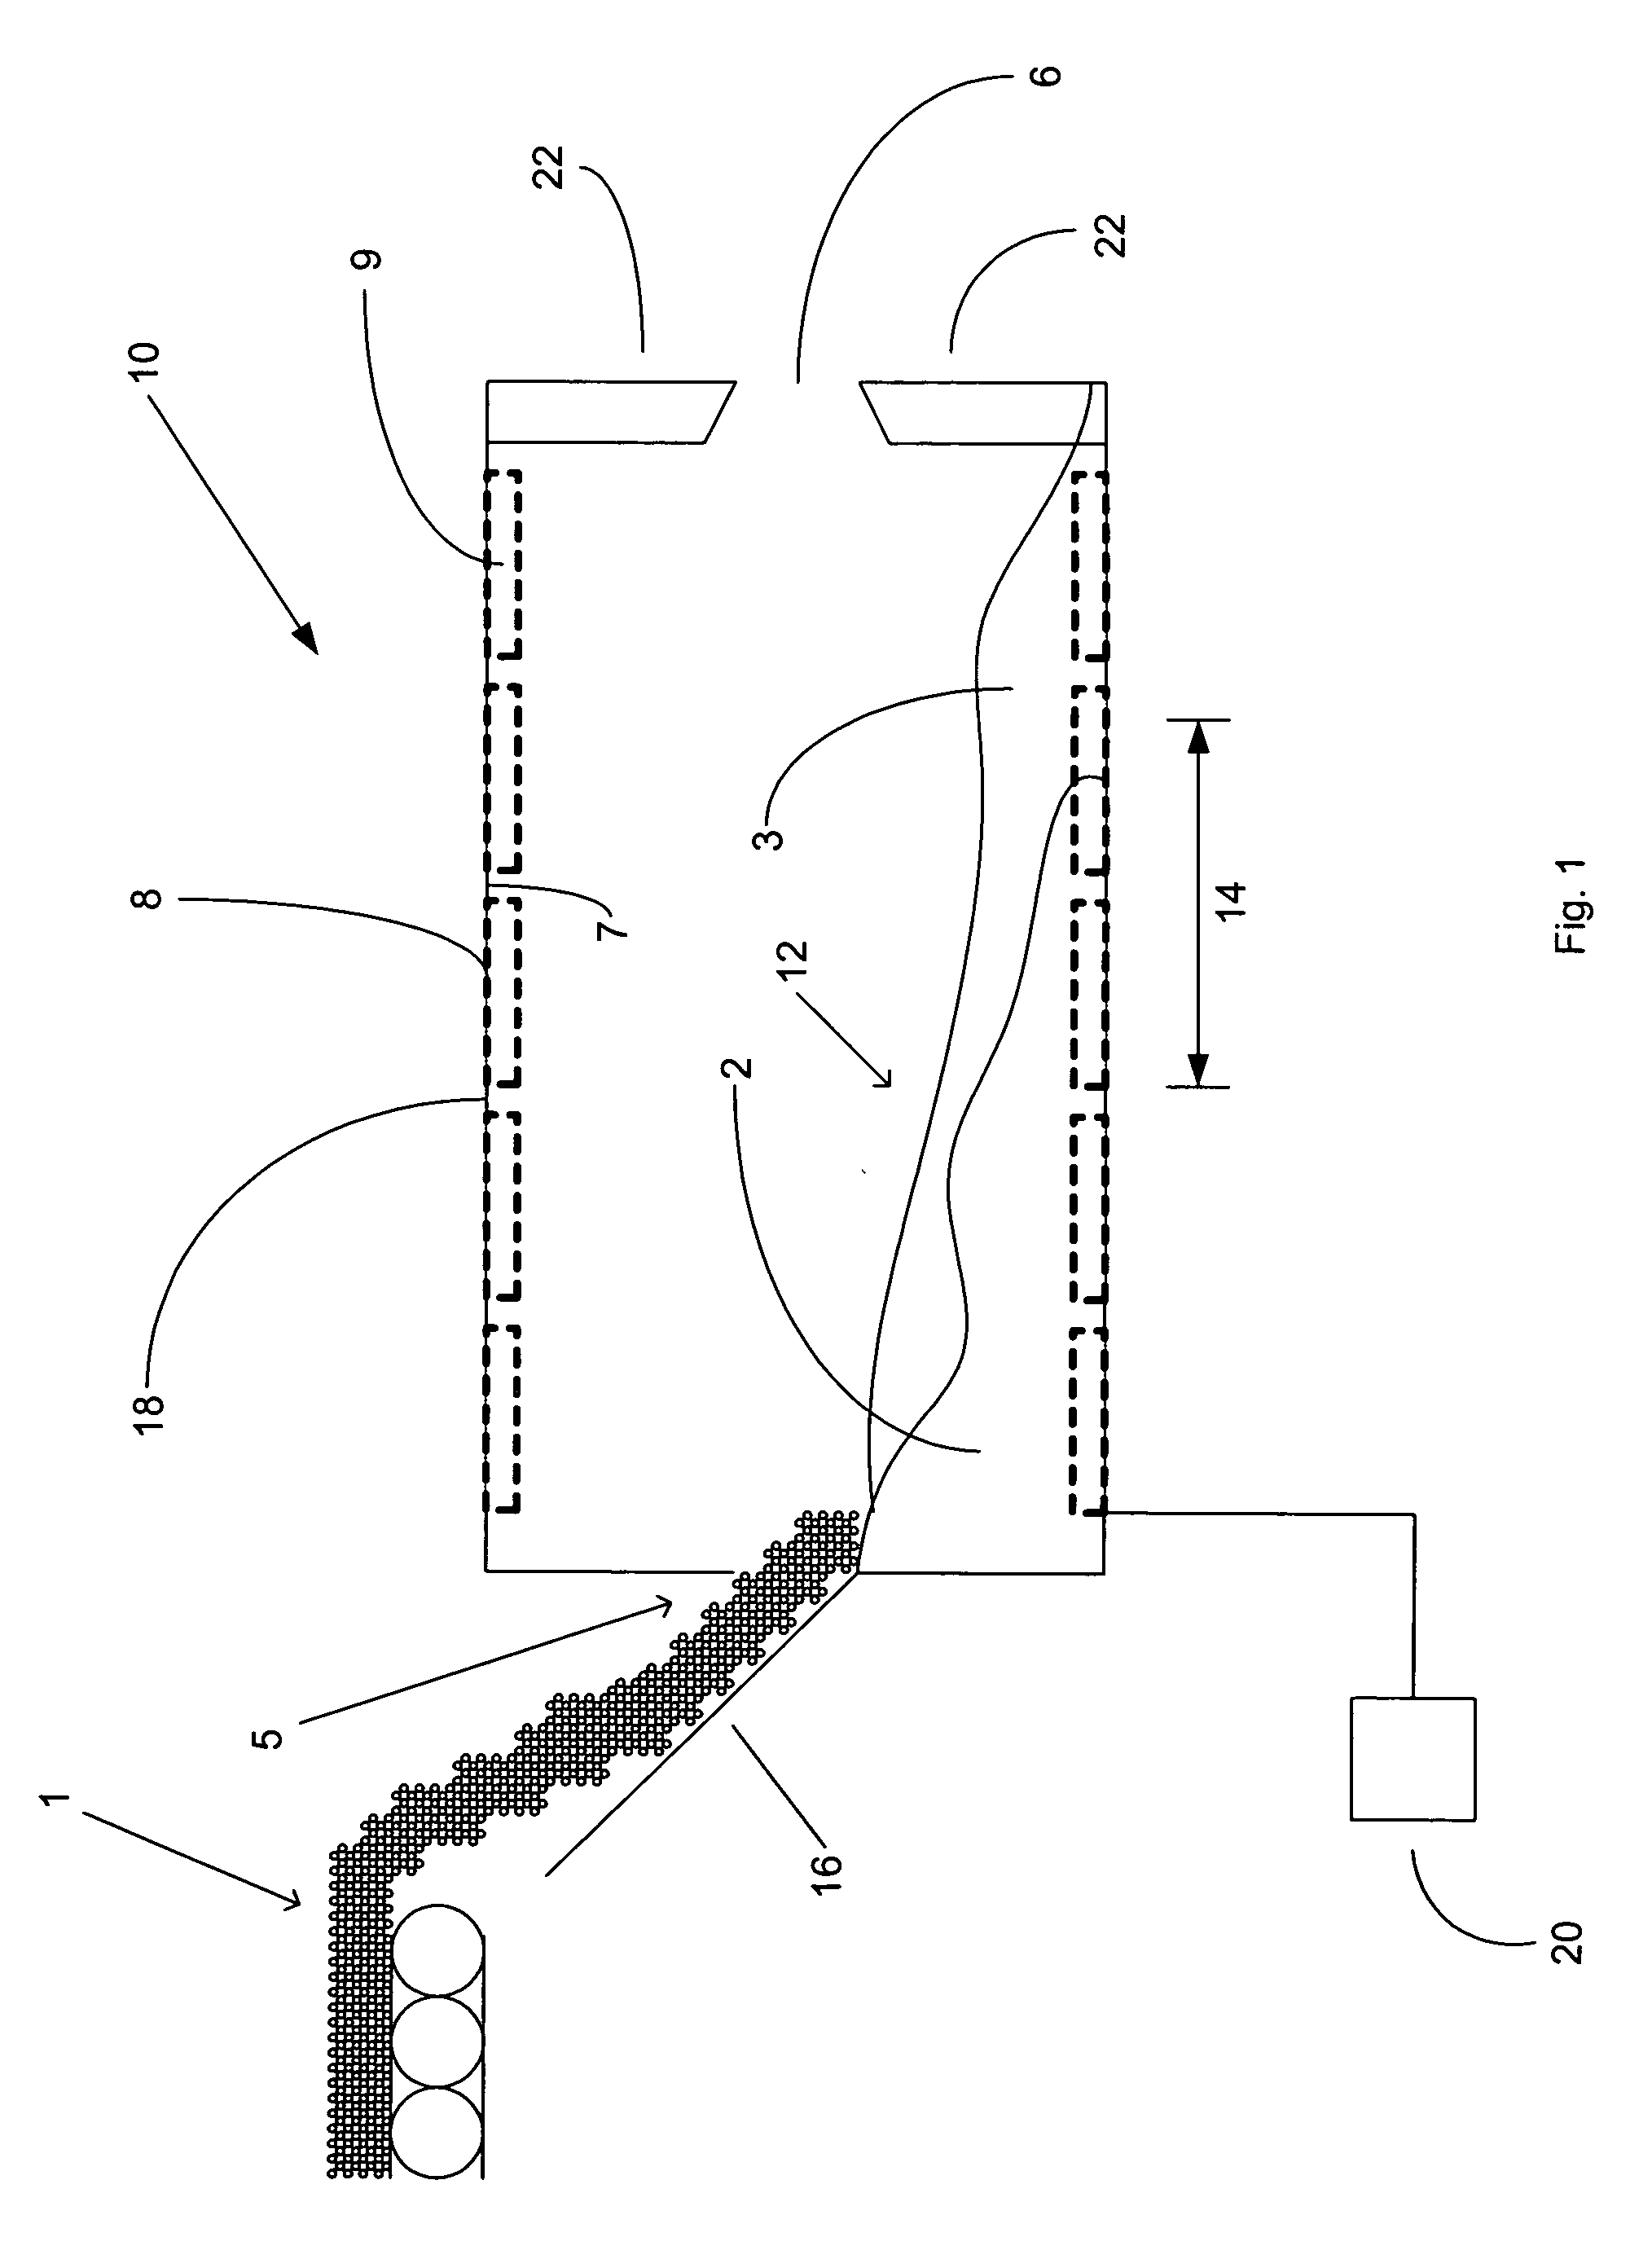 Apparatus and process for control of rotary breakers